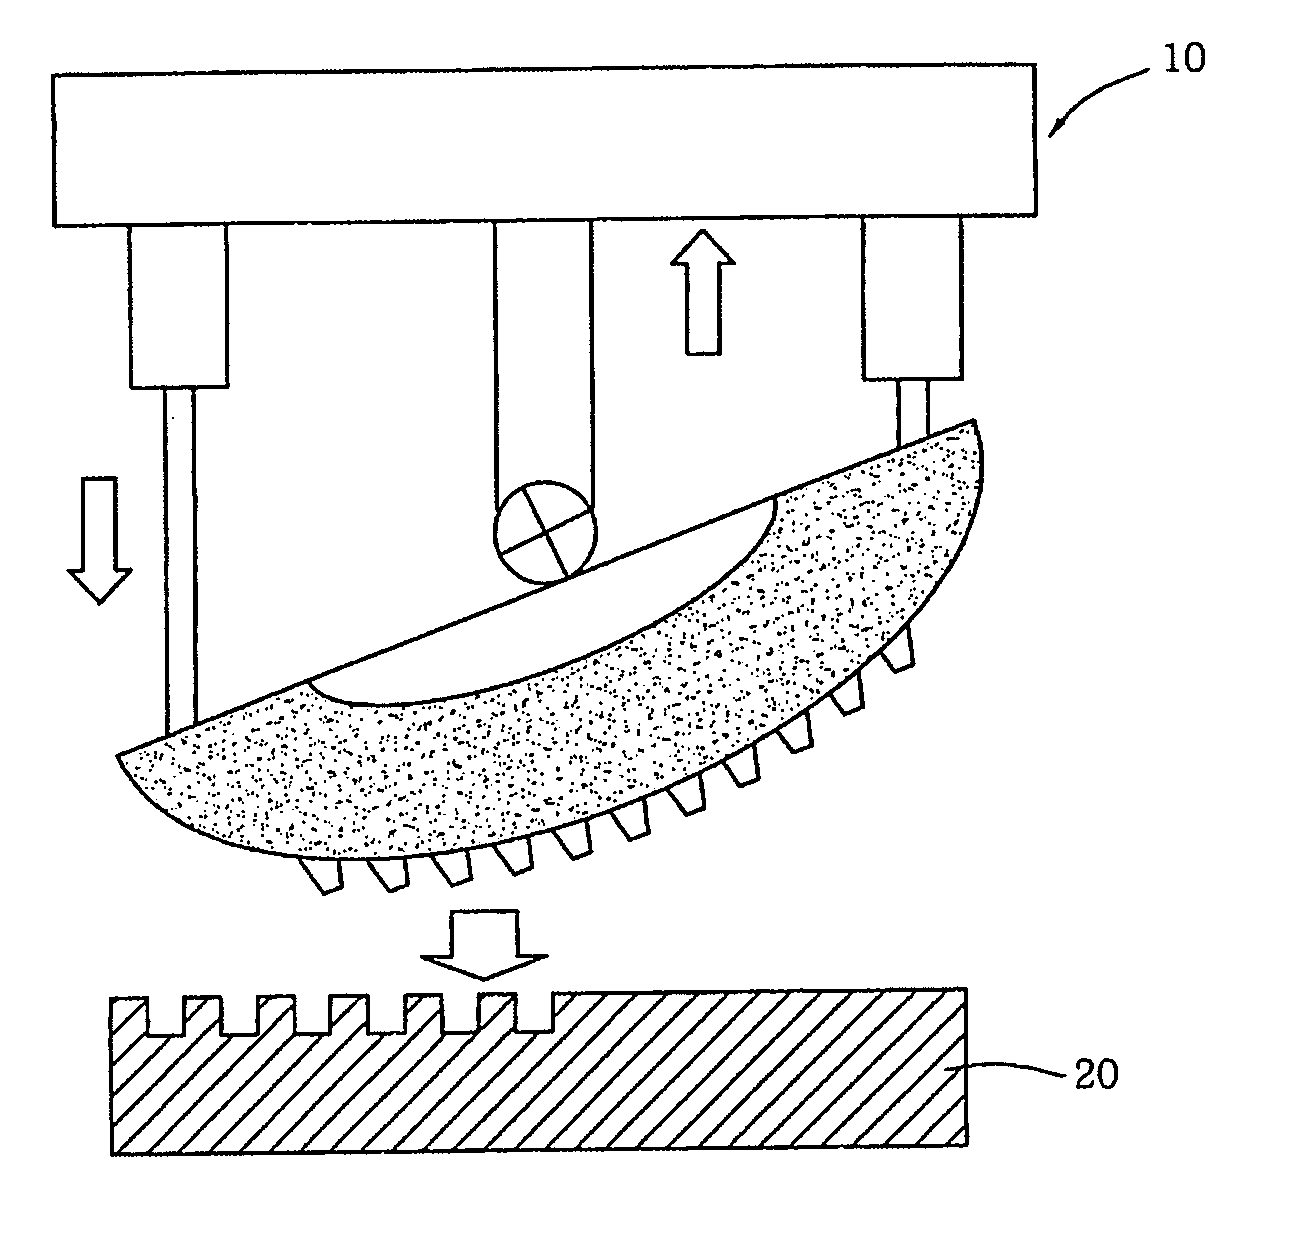 Imprinting apparatus, system and method